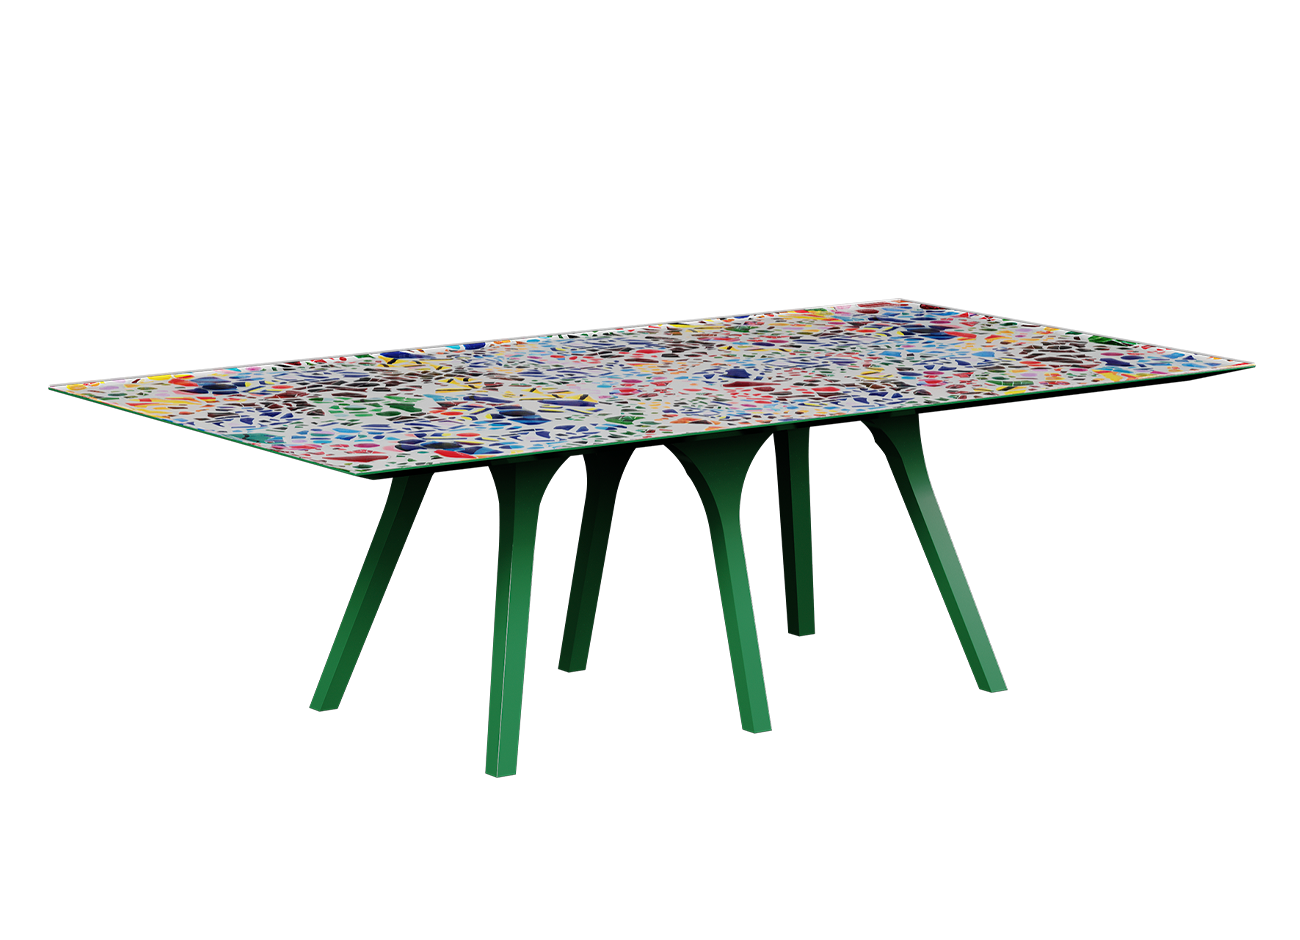 Templo dining table